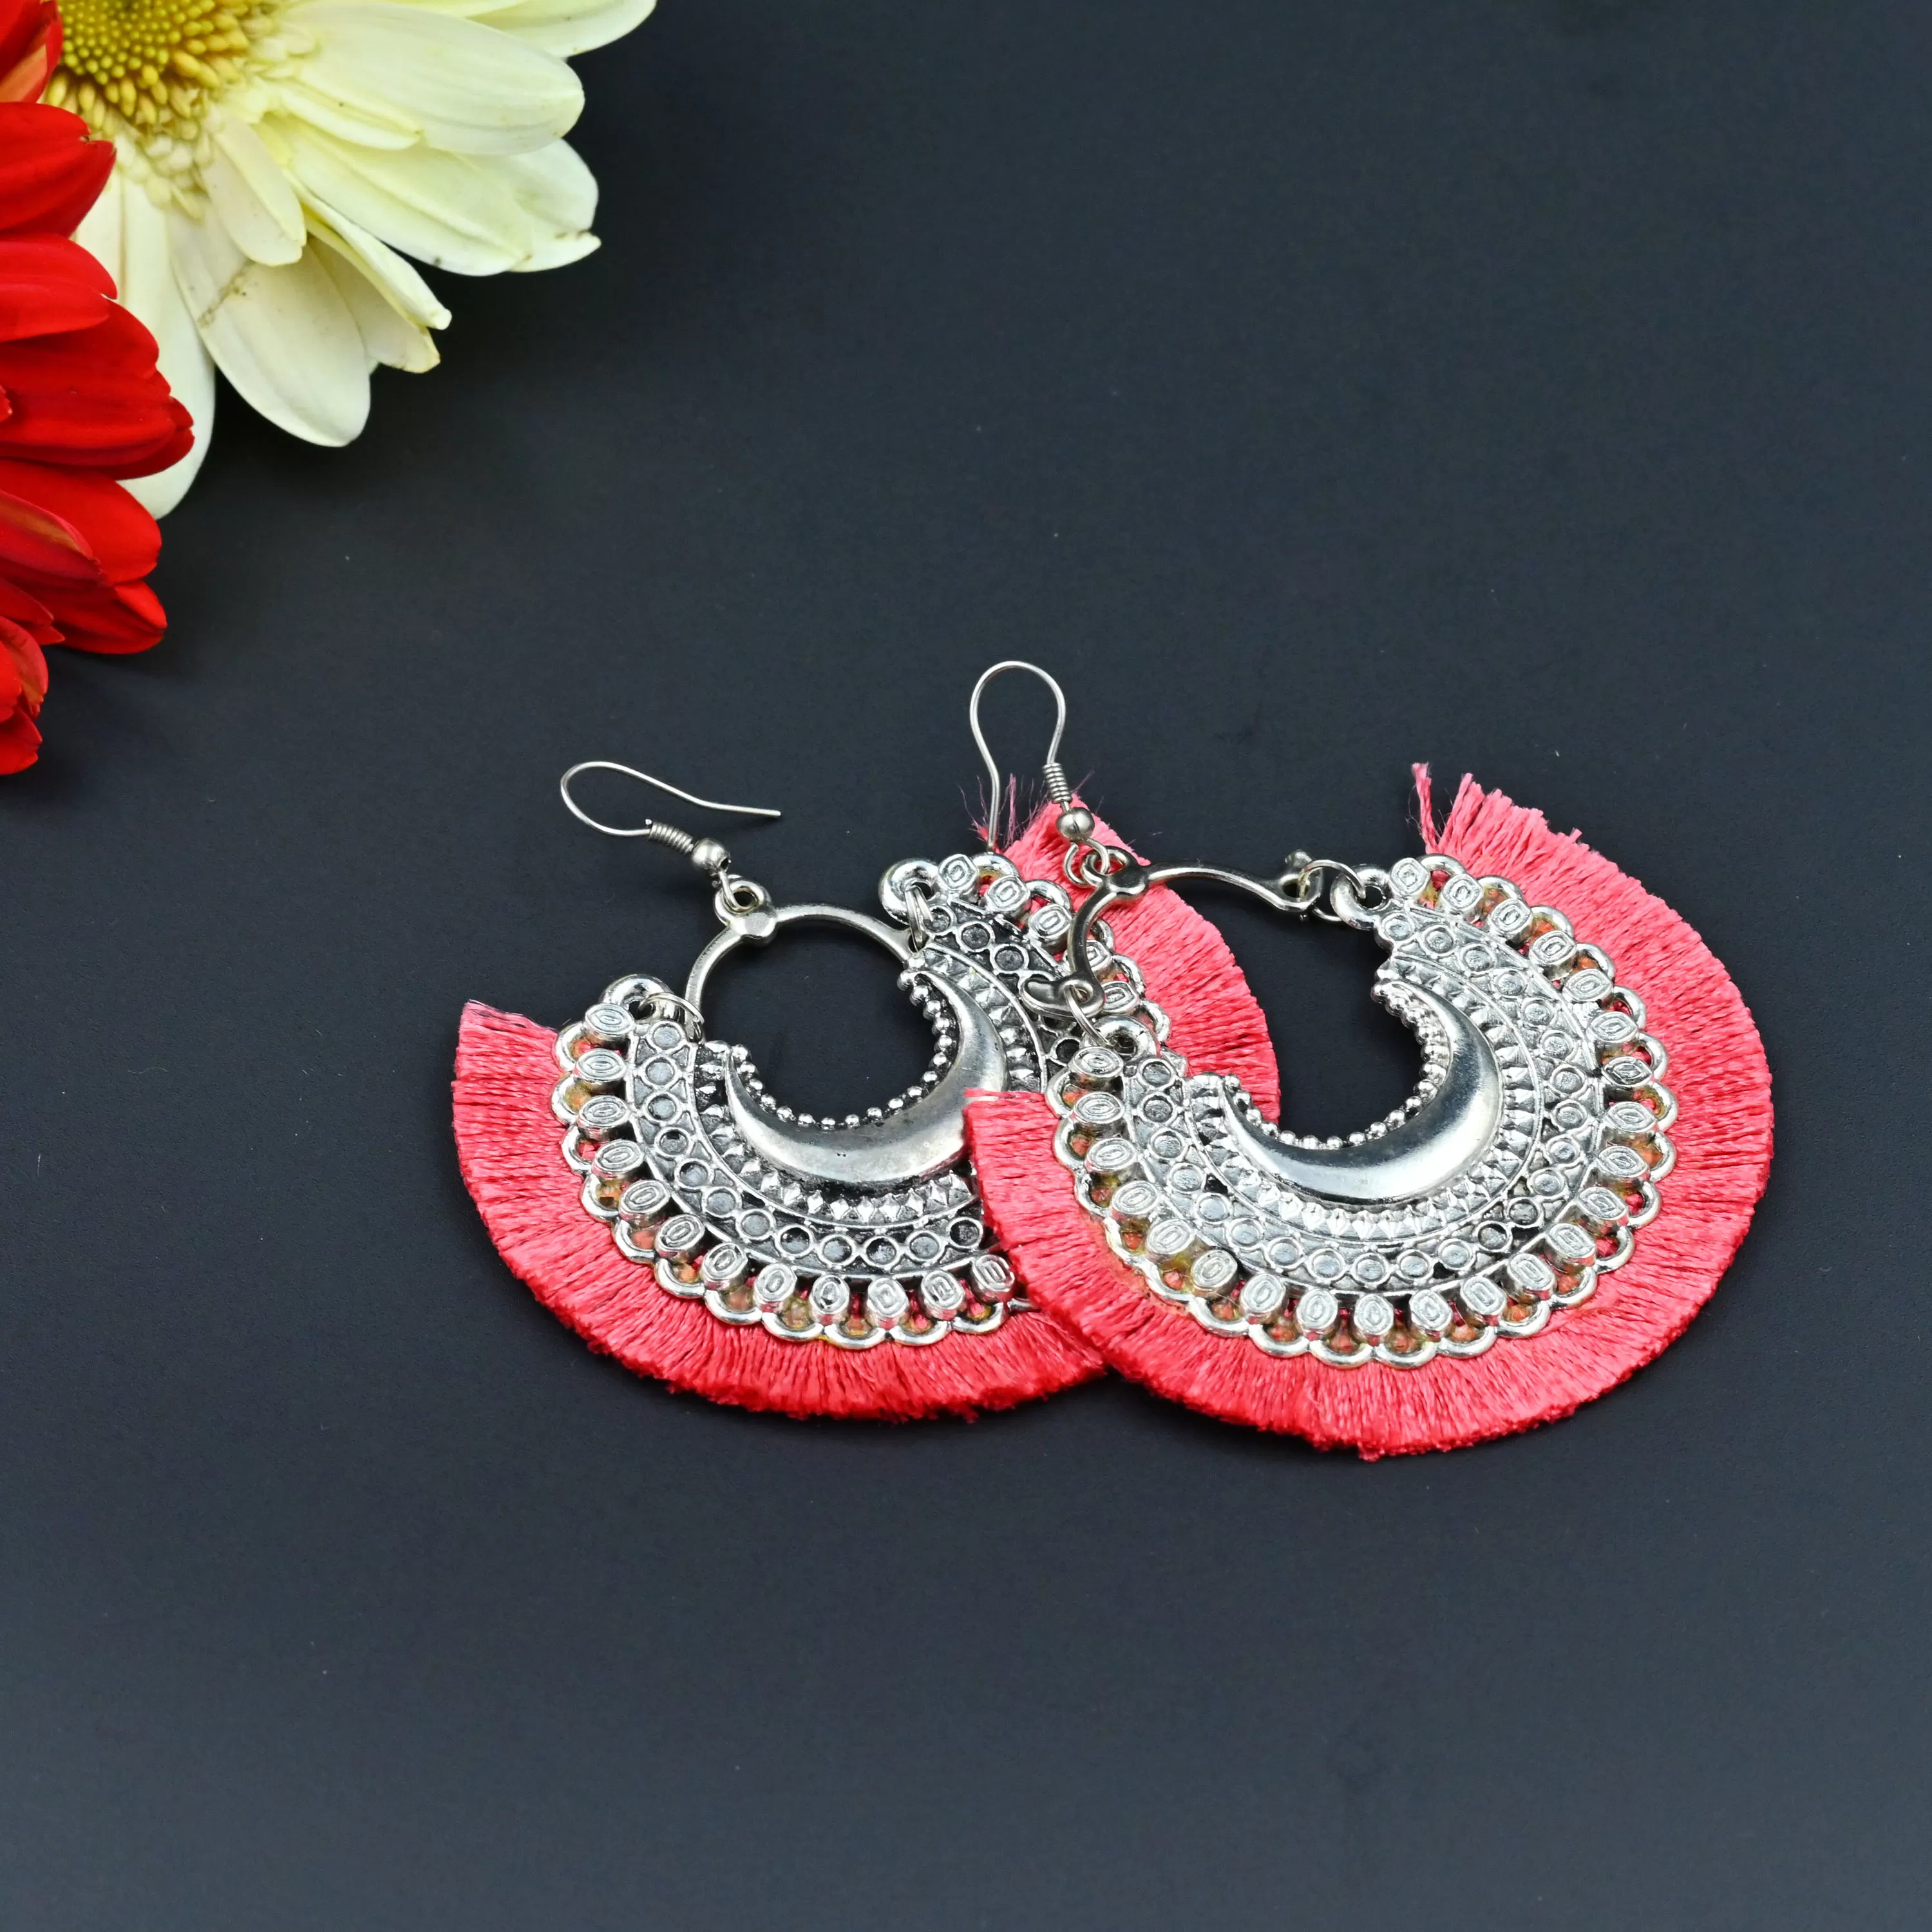 Women's Oxidized Crescent Moon Earring with Rouge Thread Party Wear.